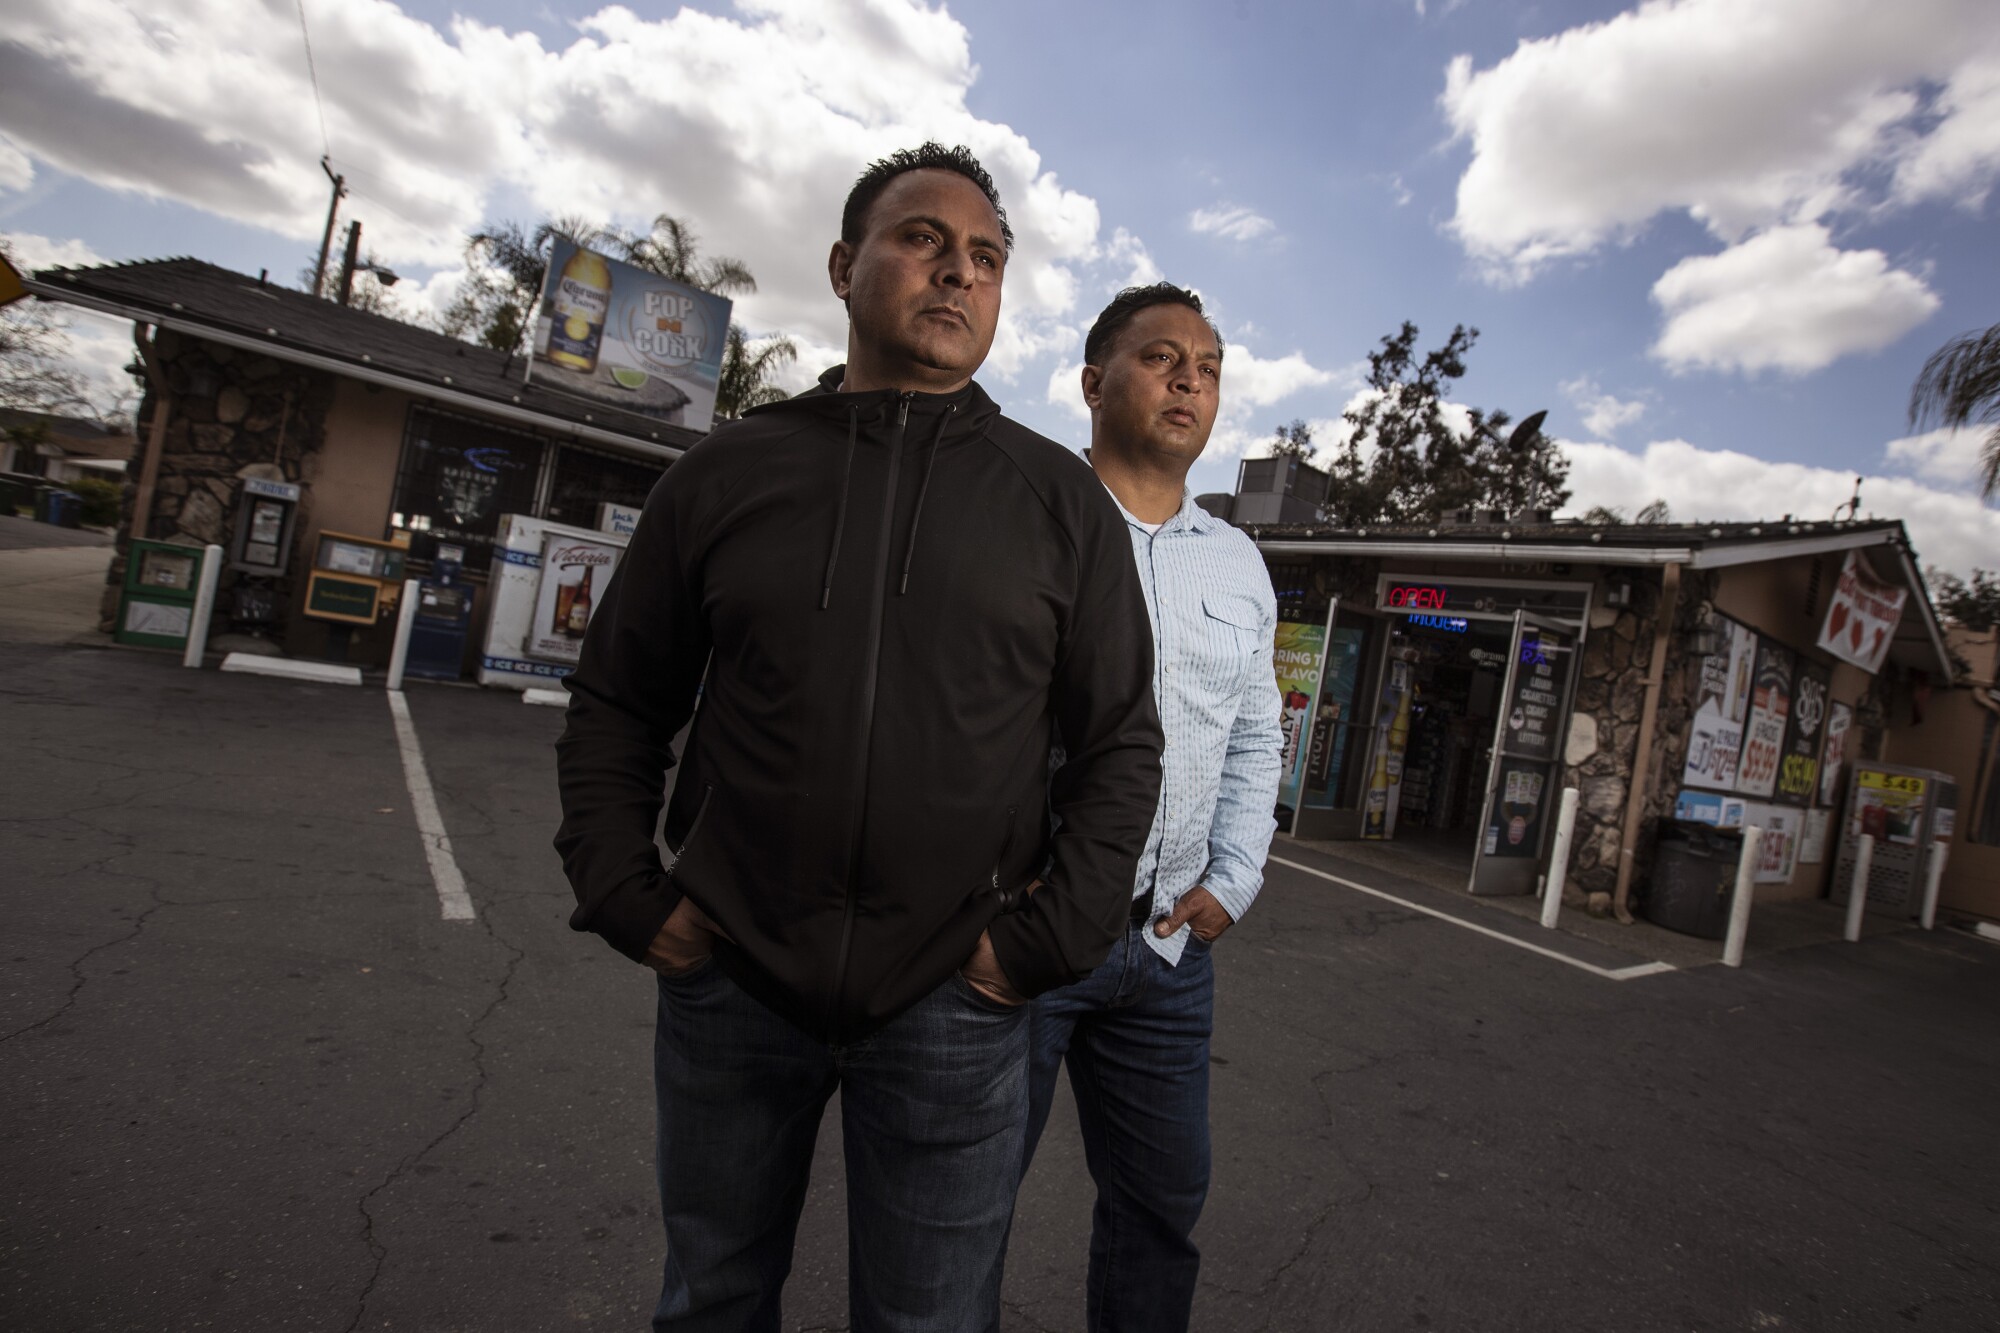 Brothers Daljit "Dee" Atwal, left, and Baljit "Bobby" Athwal stand outside their liquor store in Turlock.